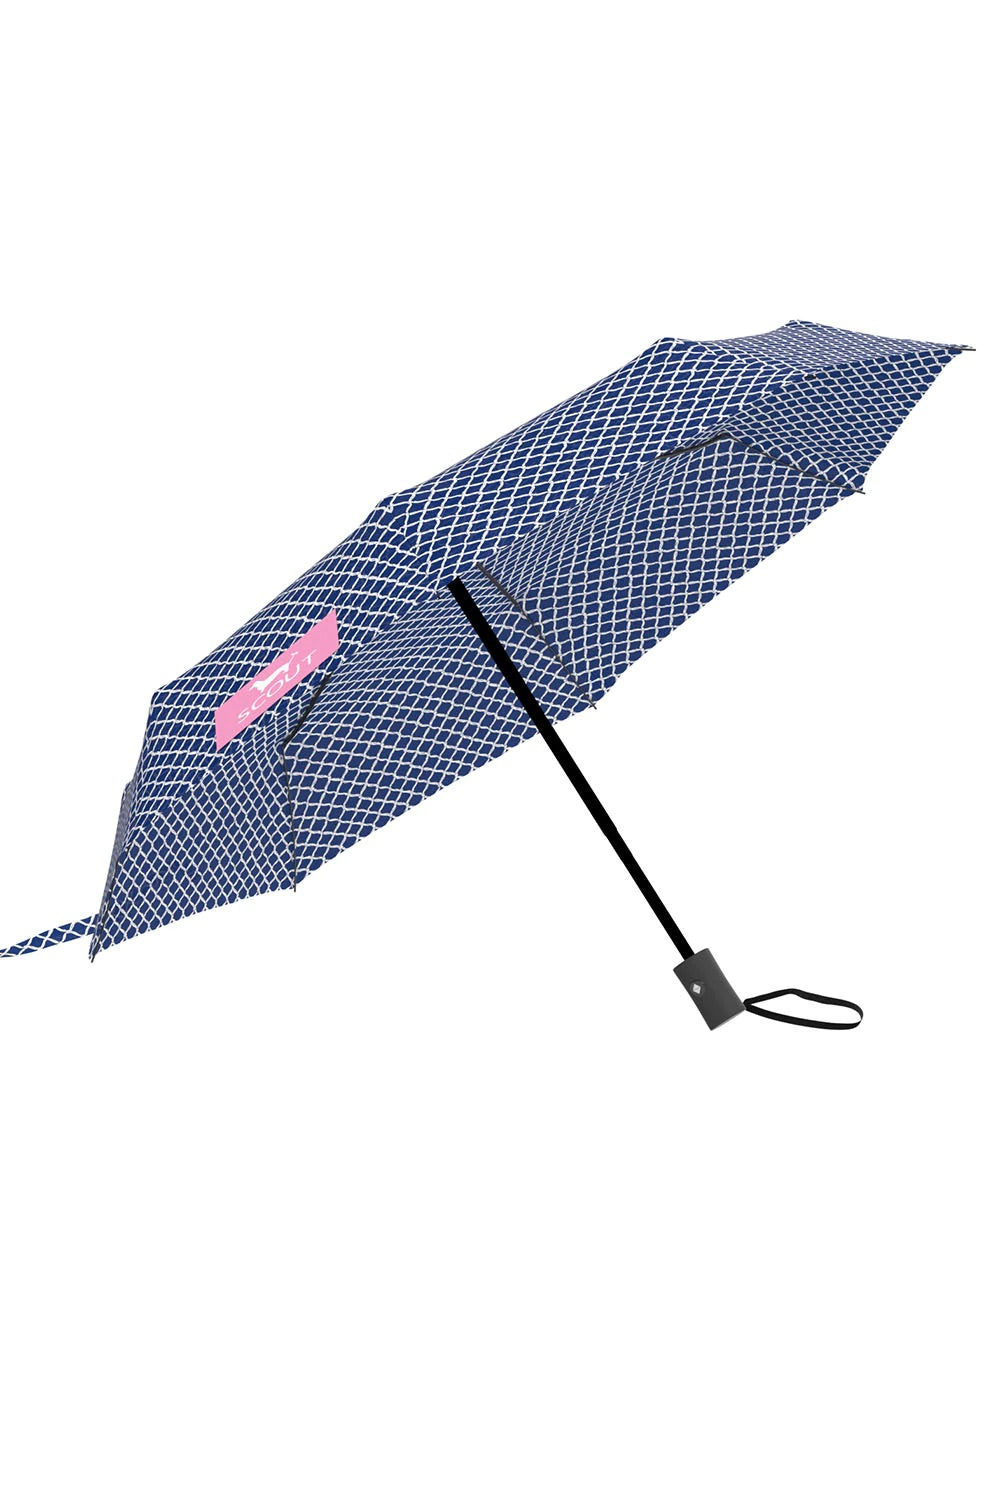 High and Dry Umbrella | Knotty but Nice